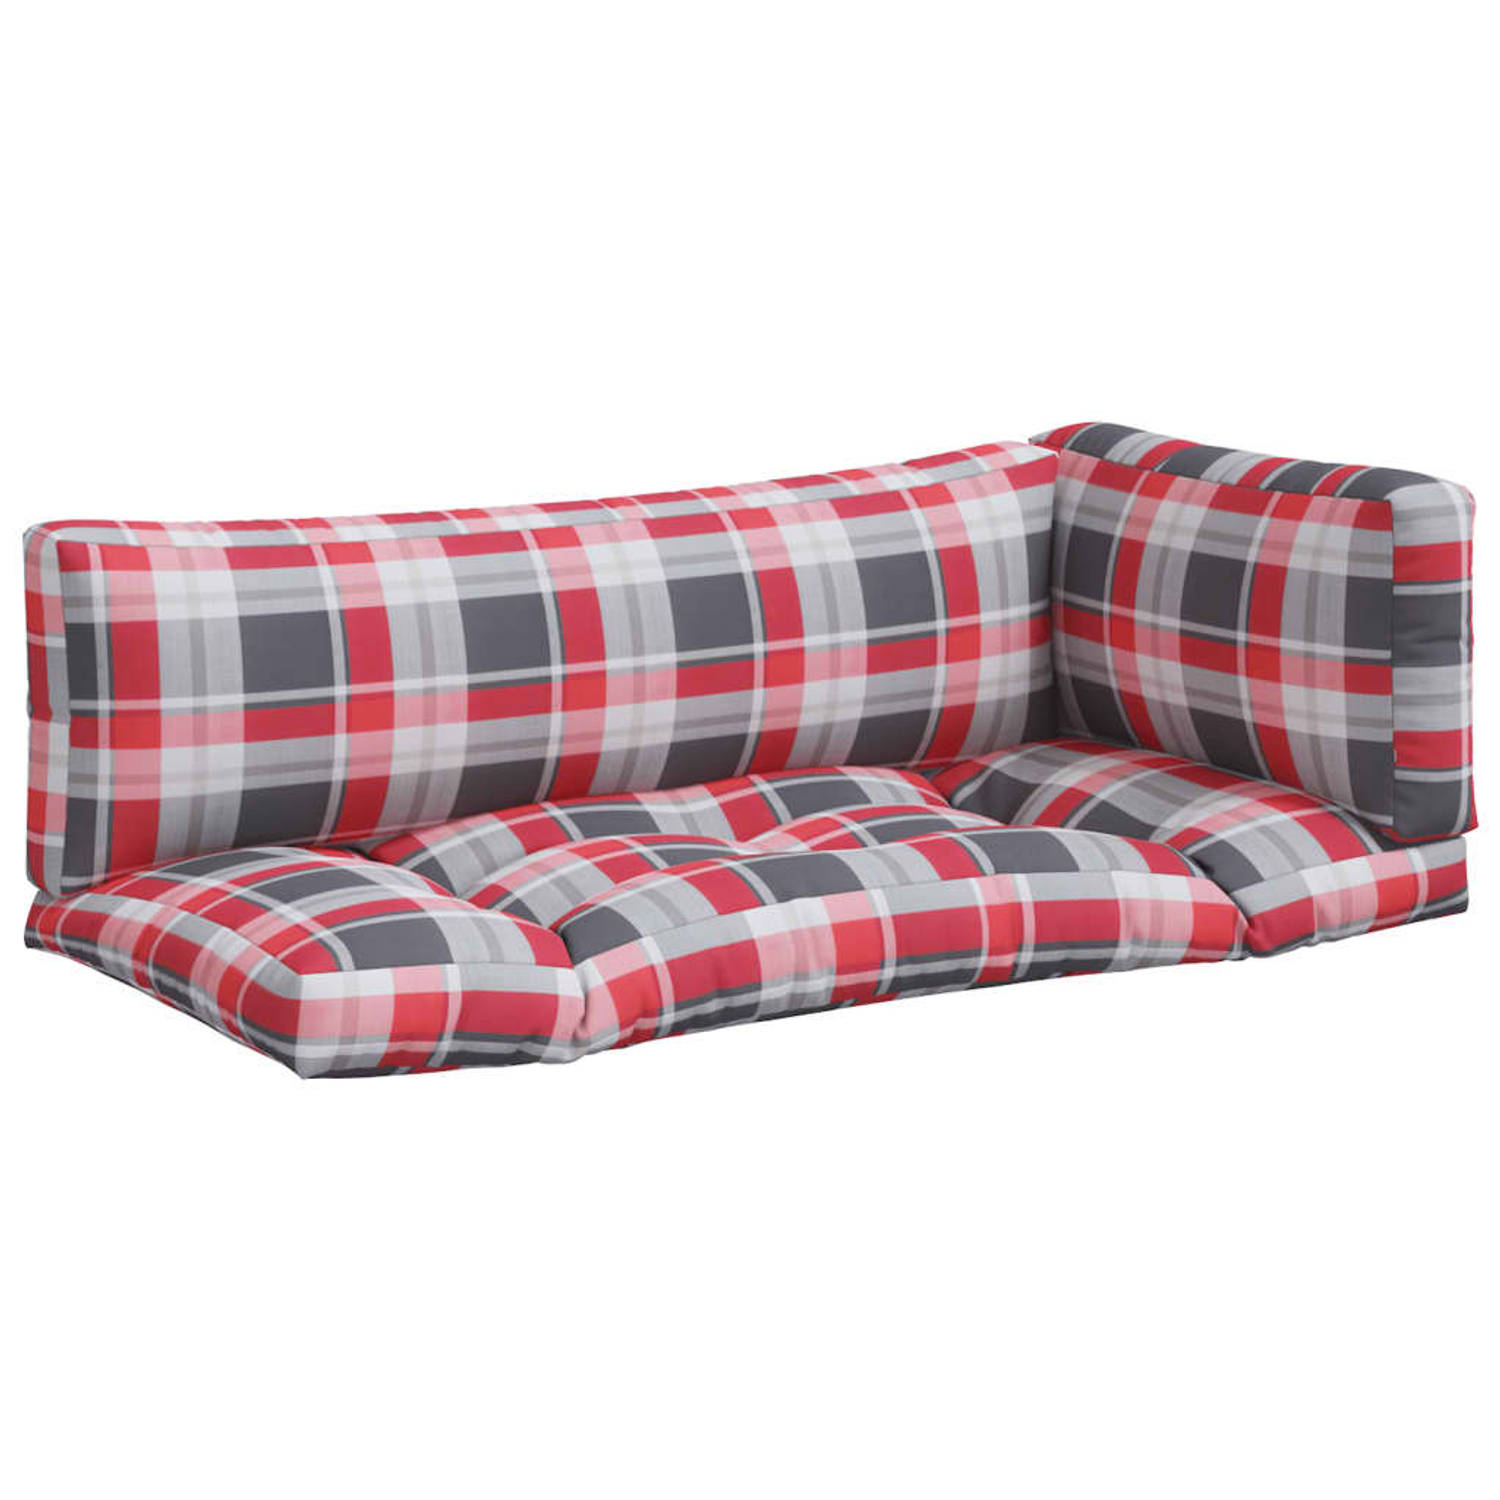 The Living Store Palletkussens - Polyester - 103x58x10 cm - Rood ruitpatroon